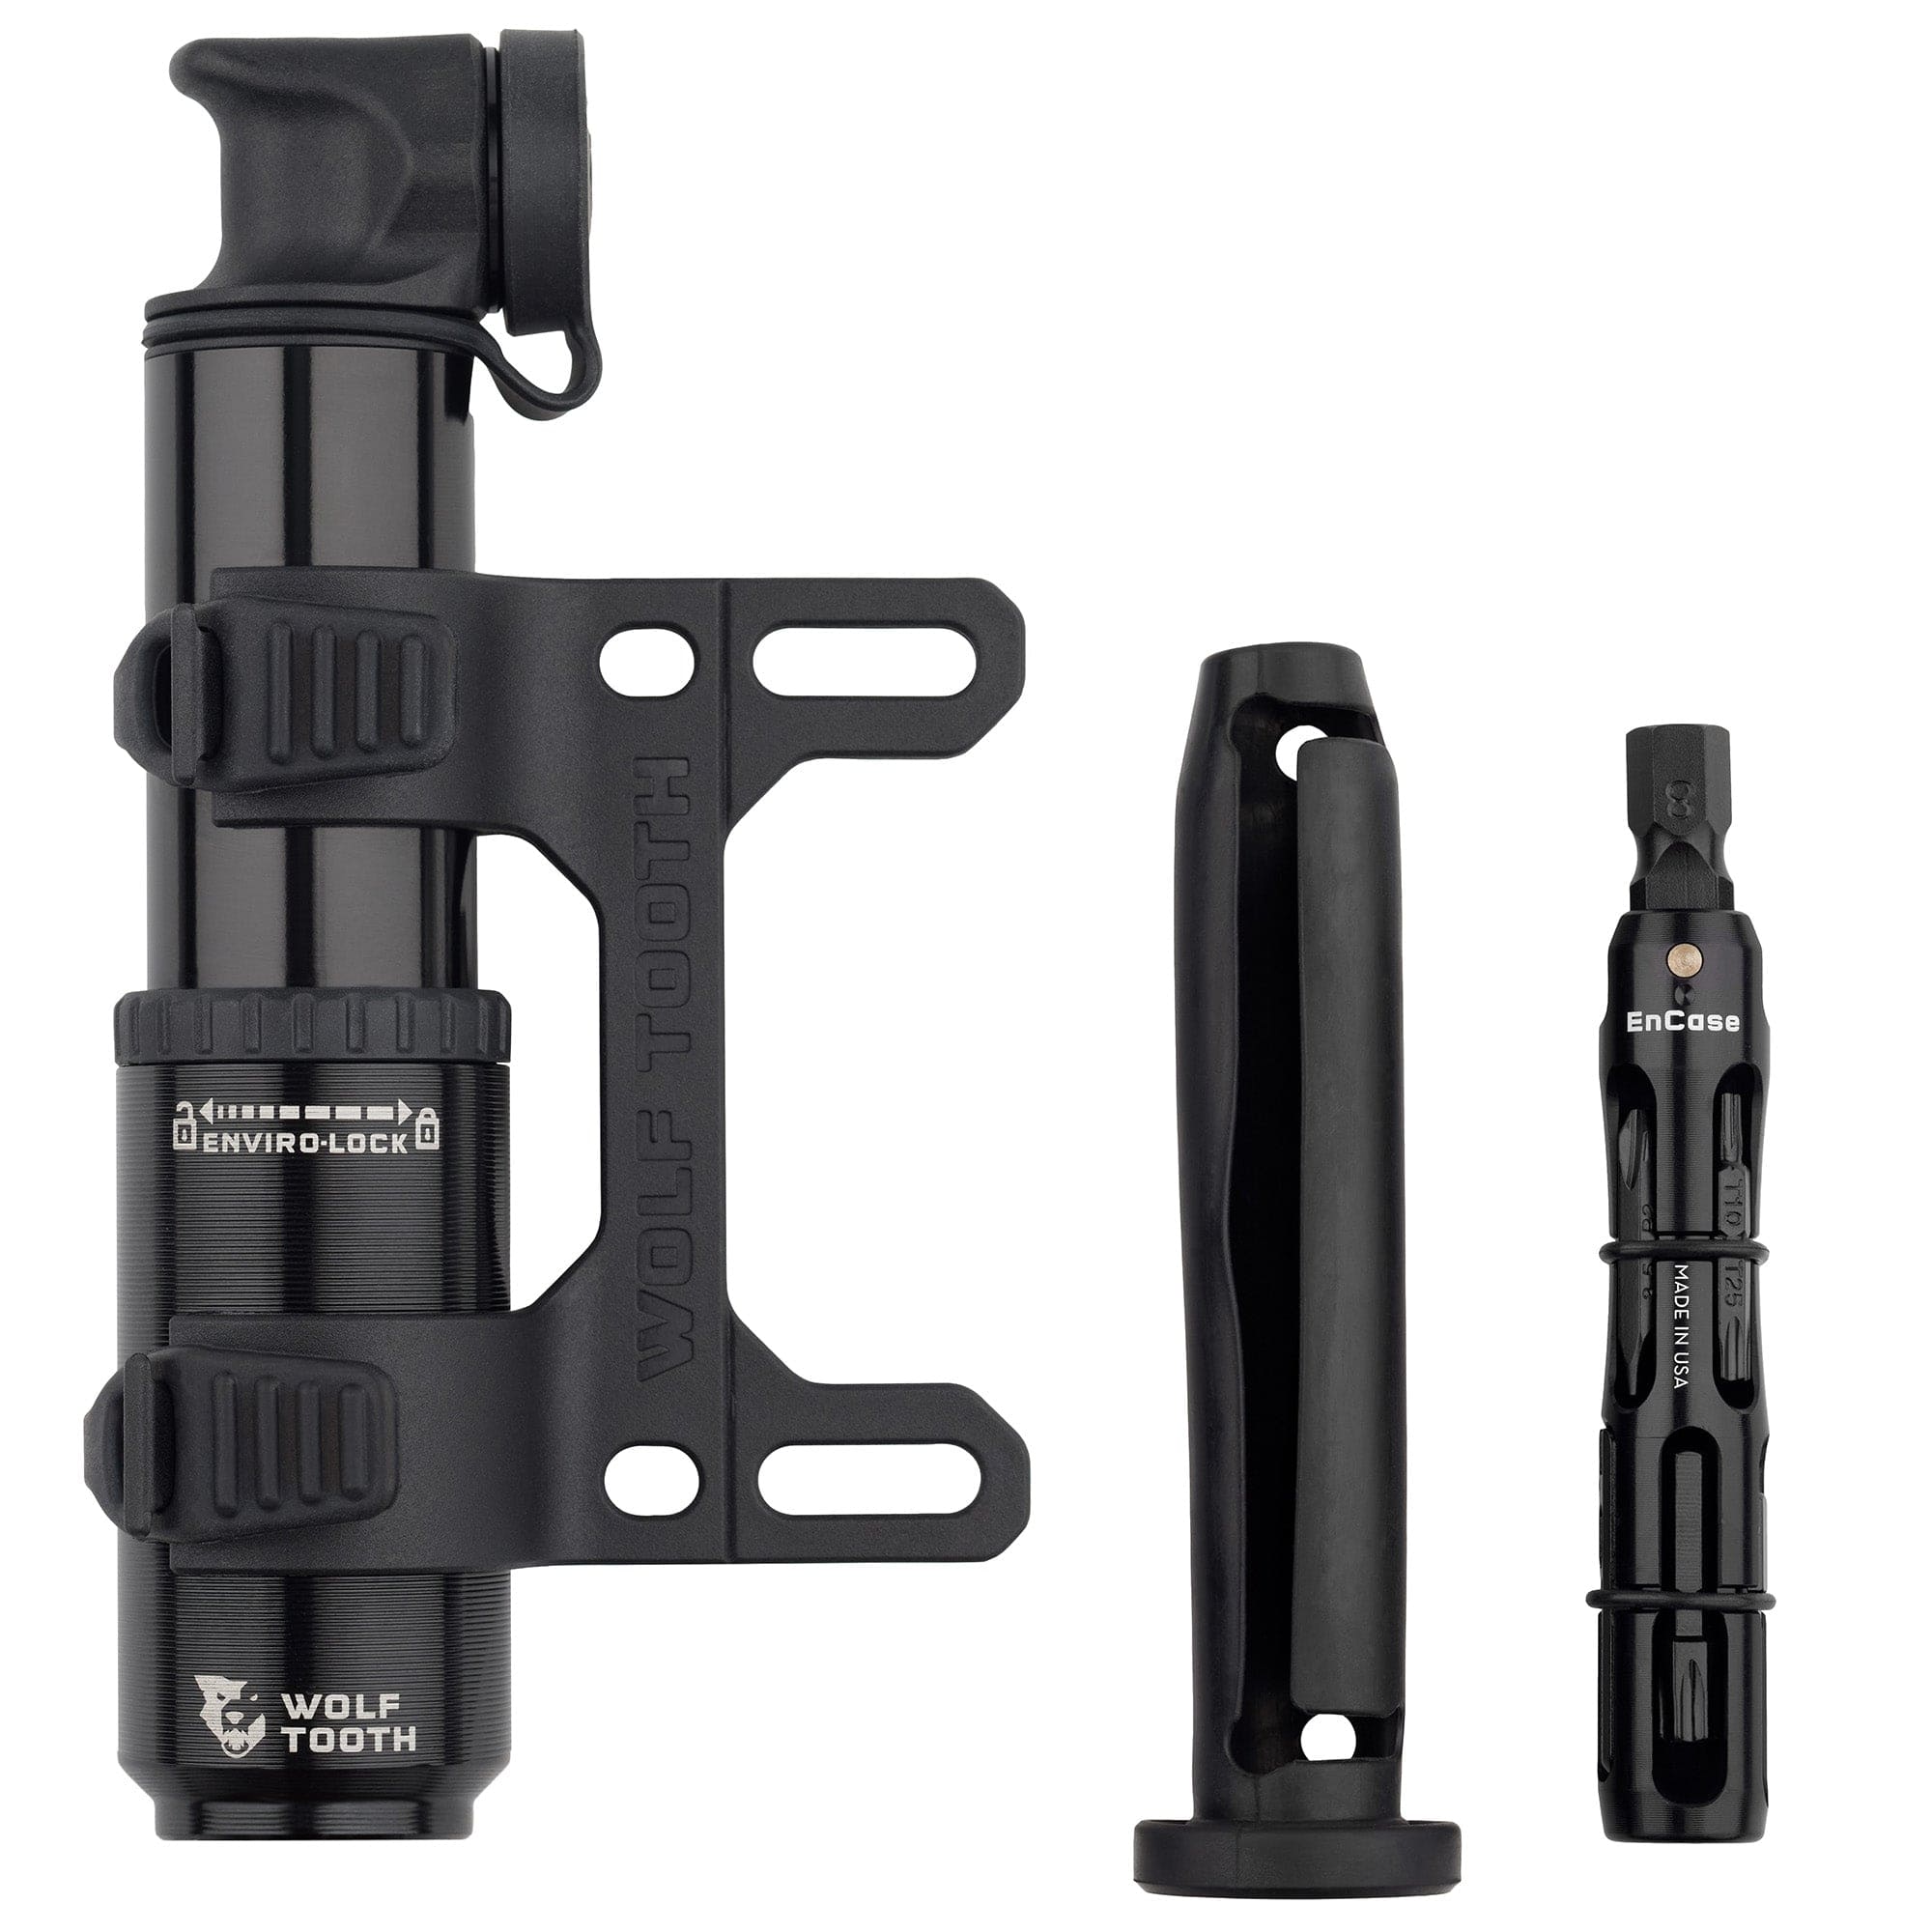 EnCase Pump 40cc with Hex Bit Multi-Tool and storage sleeve